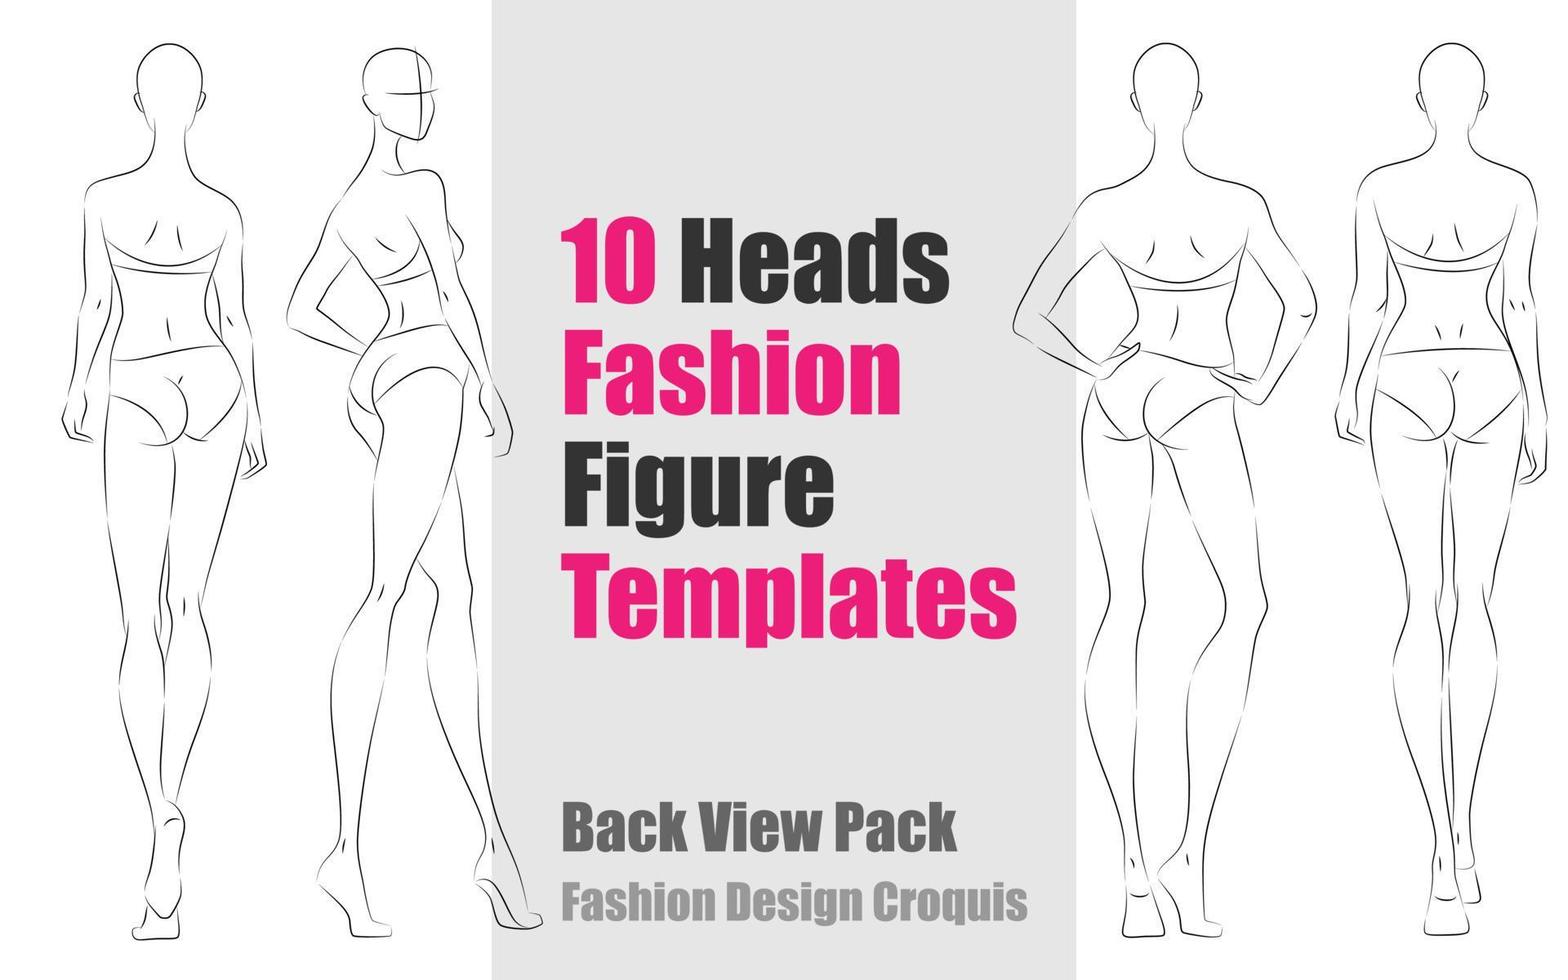 10 Heads Fashion Figure Templates - Back View Pack. Fashion Design Vector Croquis